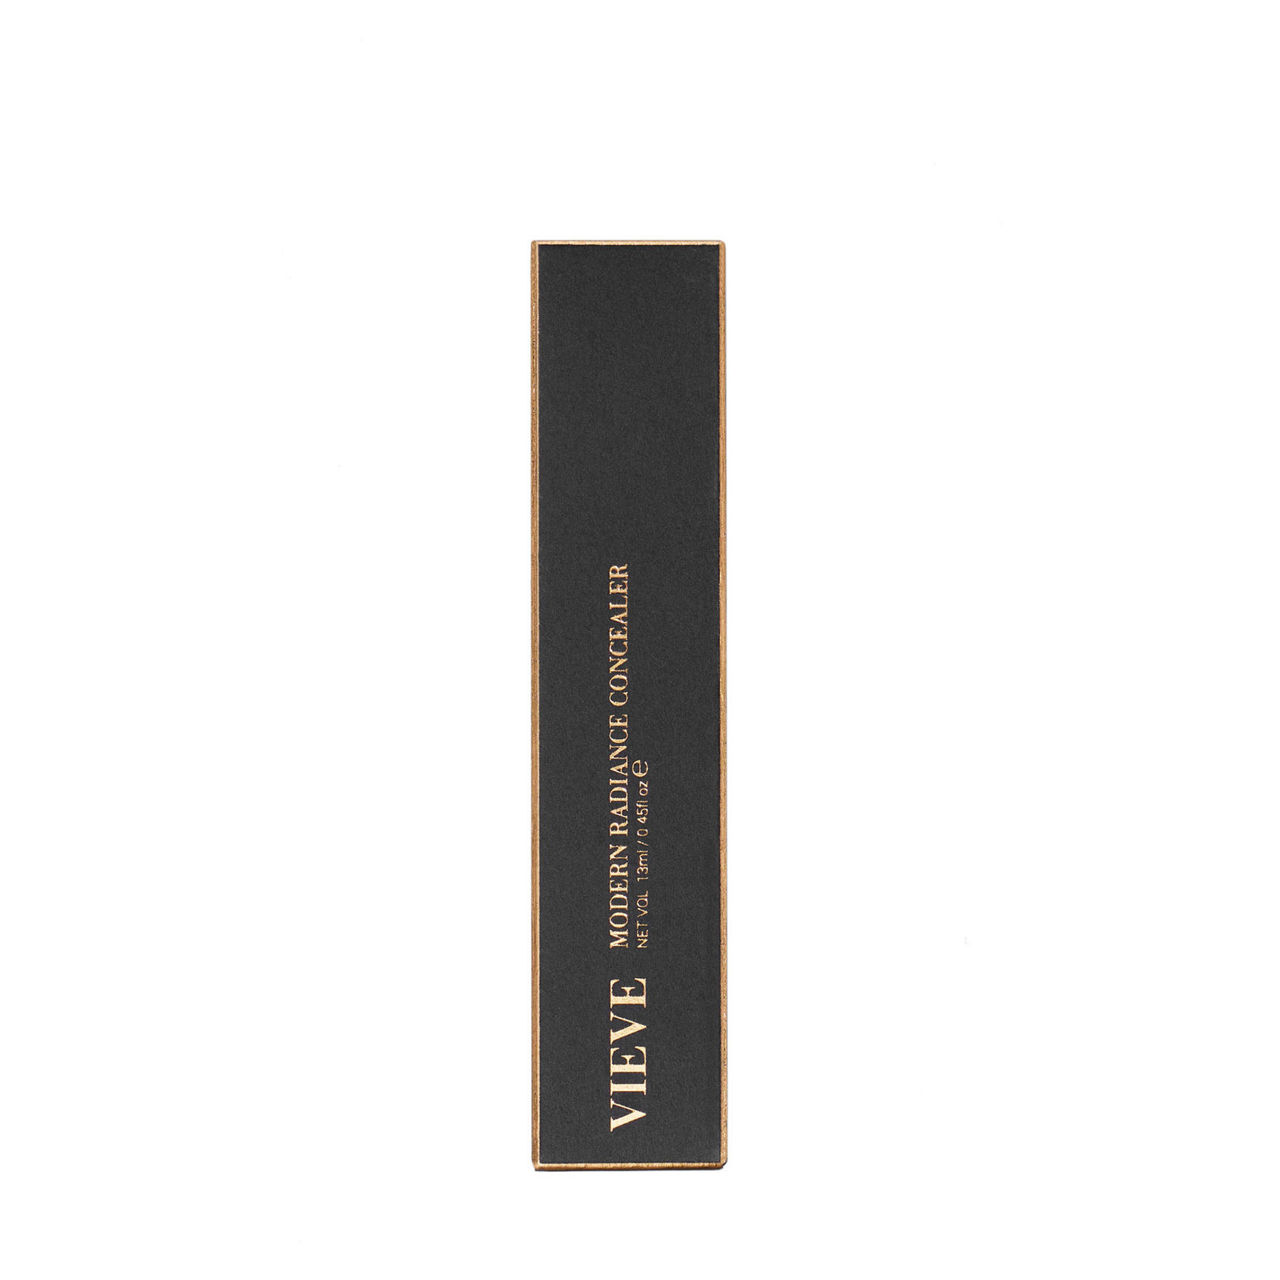 VIEVE Modern Radiance Concealer Review and Swatches